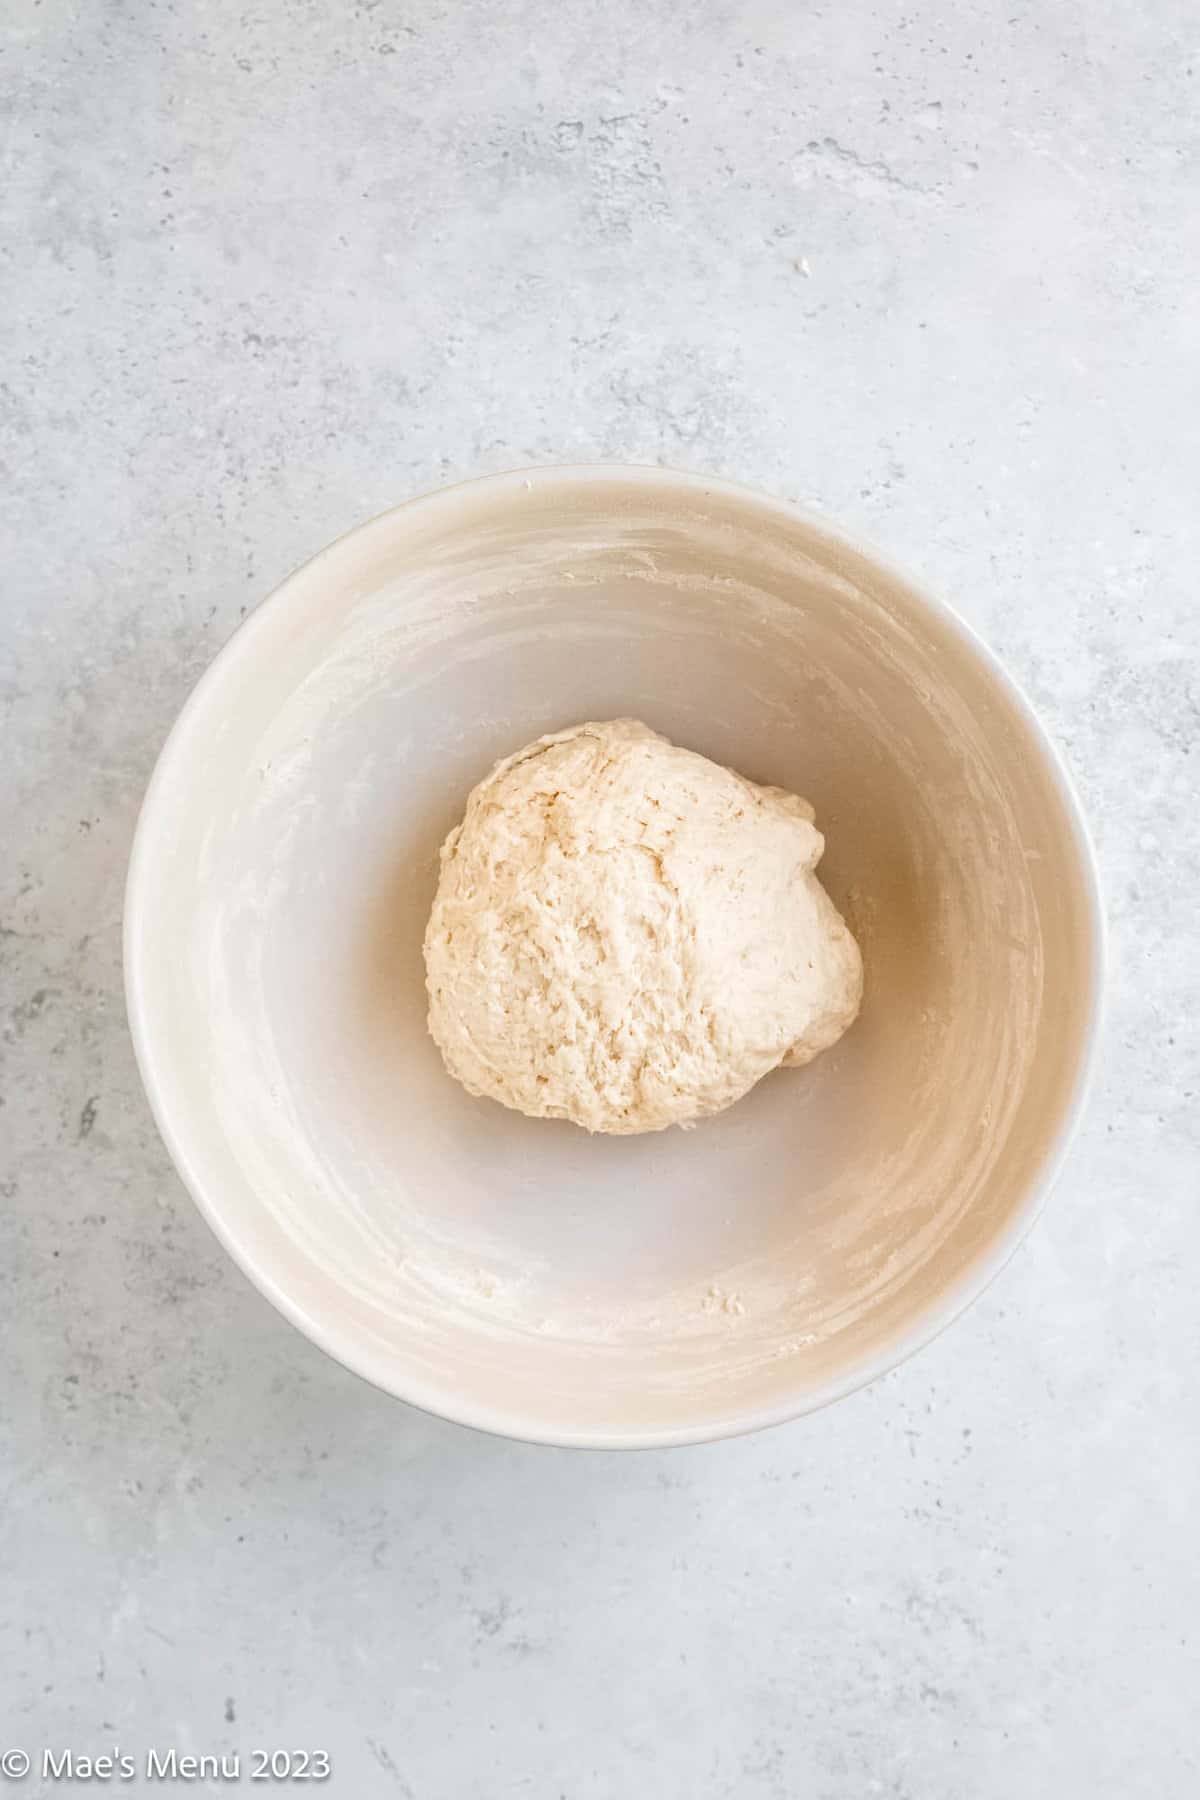 The air fryer bread dough in a bowl before proofing.